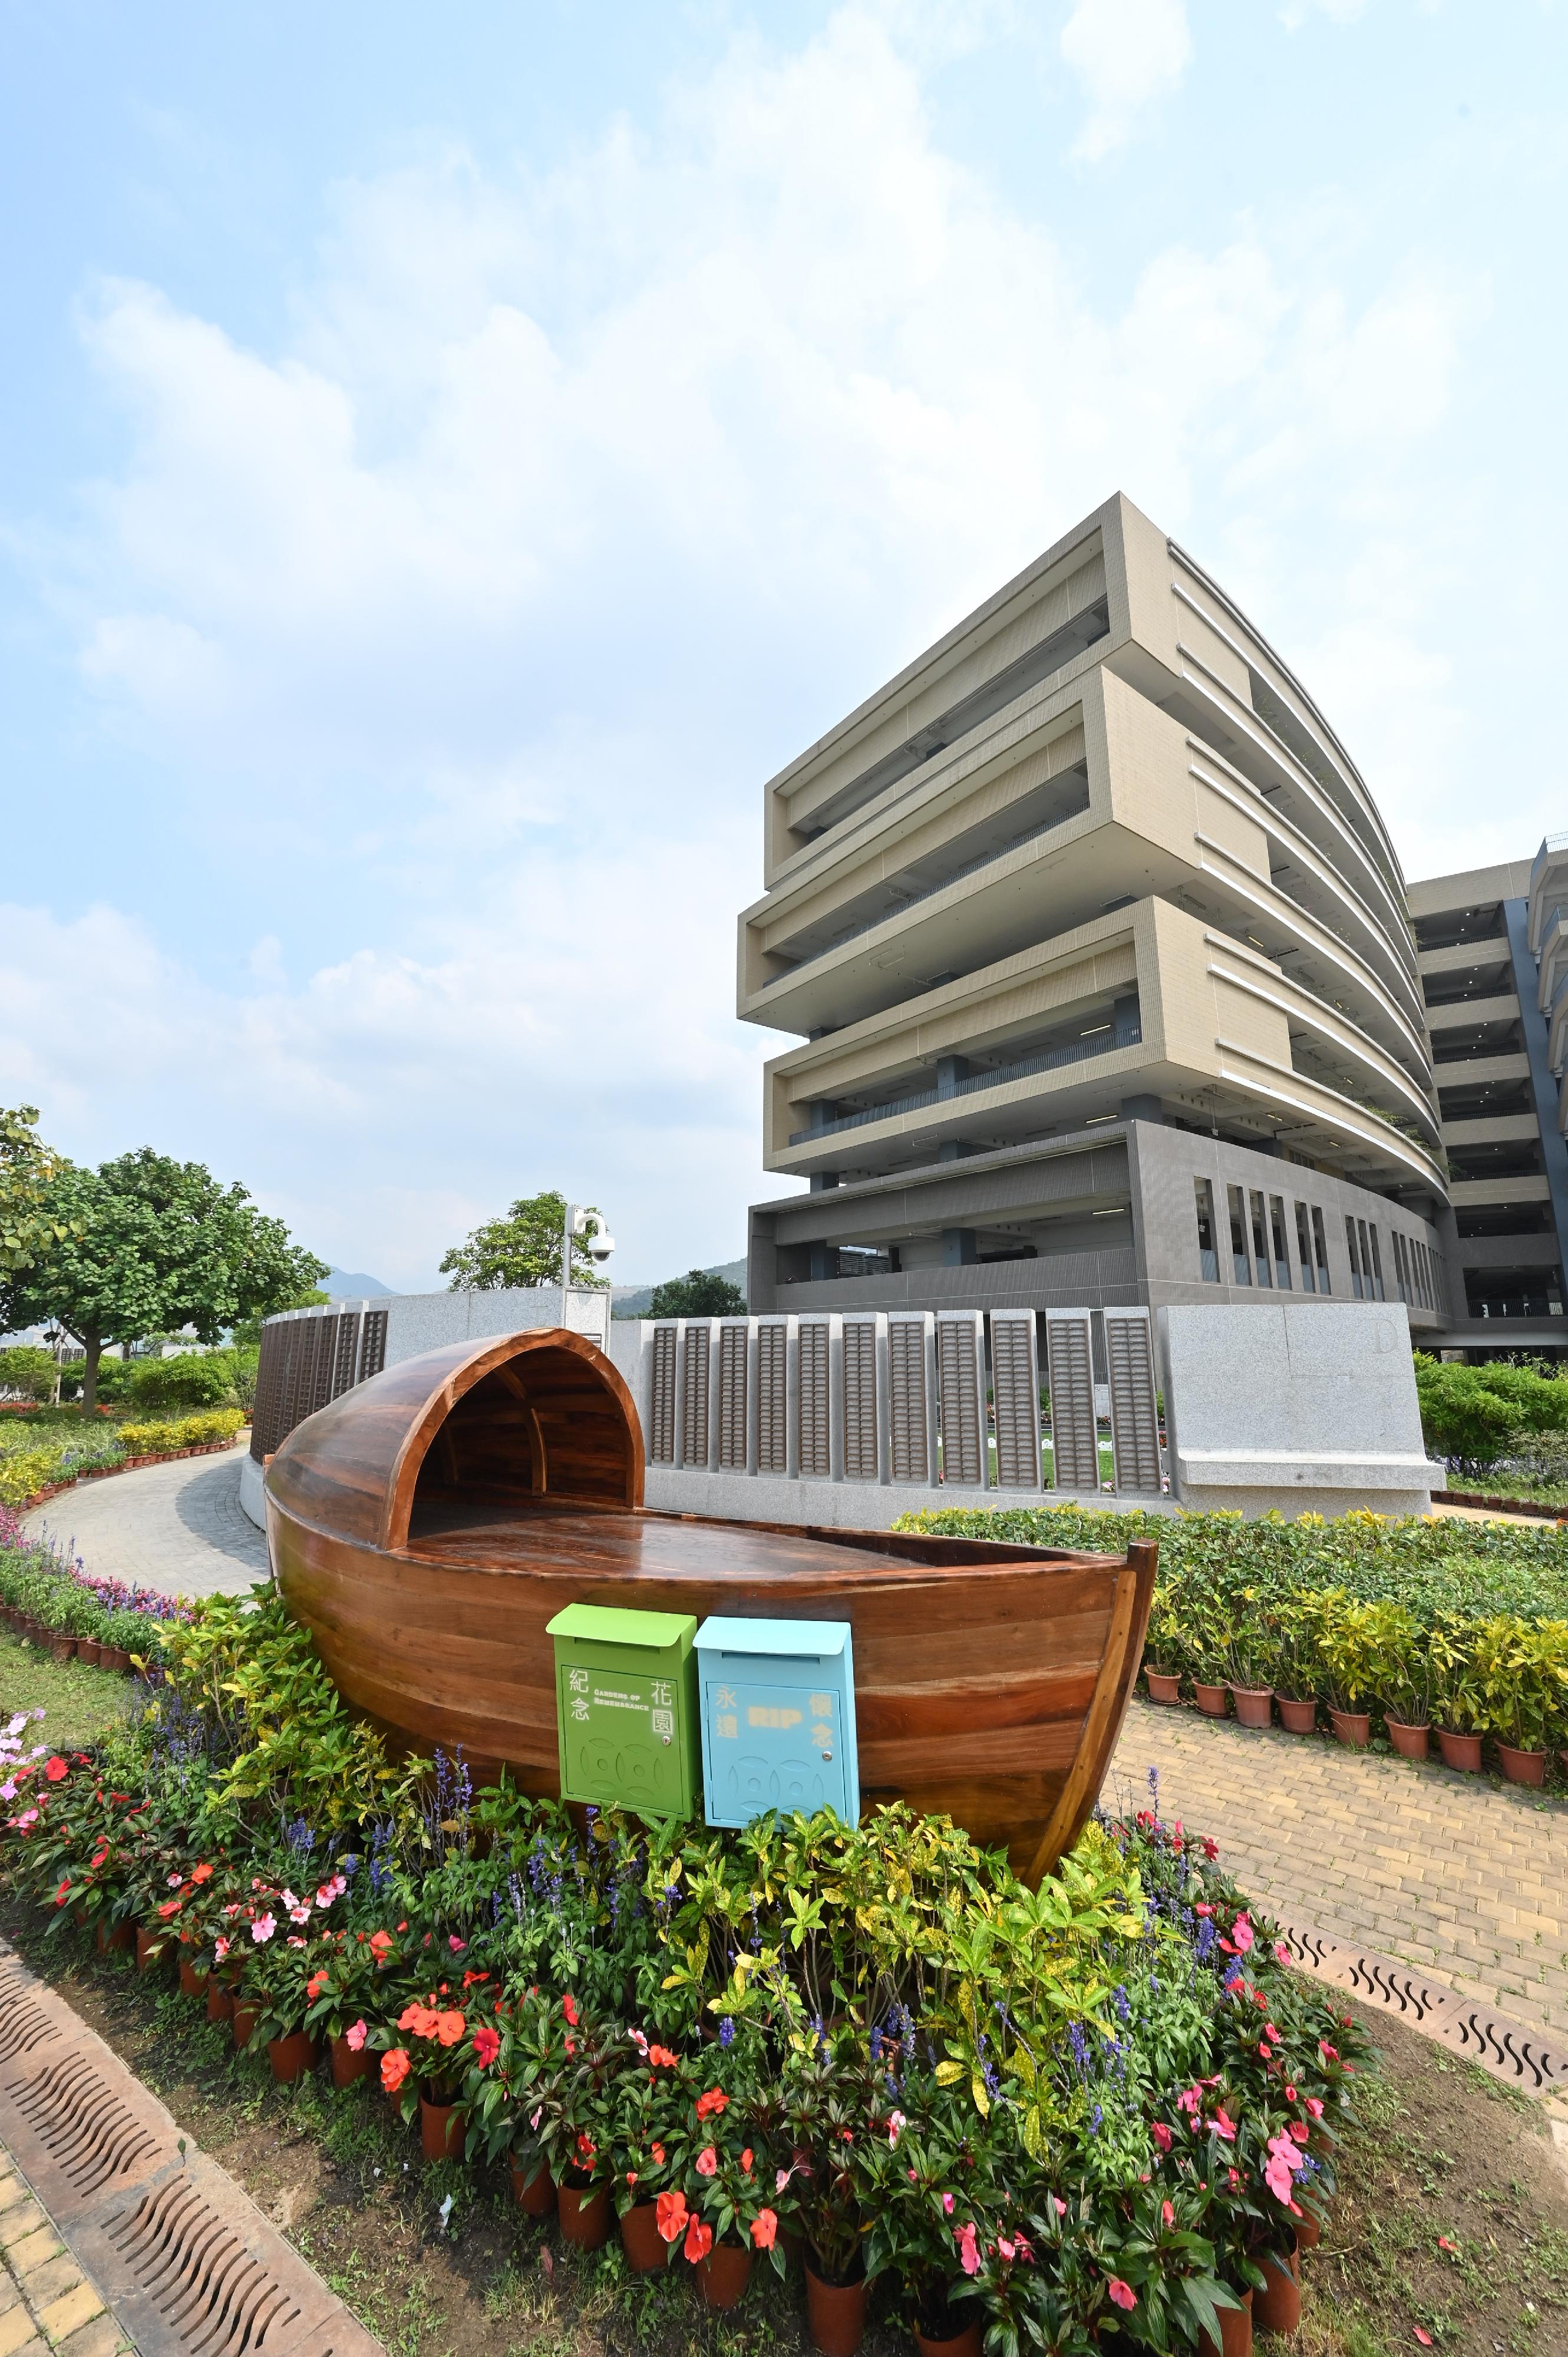 The Food and Environmental Hygiene Department said today (April 3) that to further enhance its green burial services, a wooden artwork has been installed at the Garden of Remembrance (GoR) in Tsang Tsui, Tuen Mun. Memorial post boxes with local characteristics on the artwork allow families of those who have used green burial services (including scattering of cremains at sea and in GoRs) to send their blessings and remembrance to the deceased by posting memorial notes